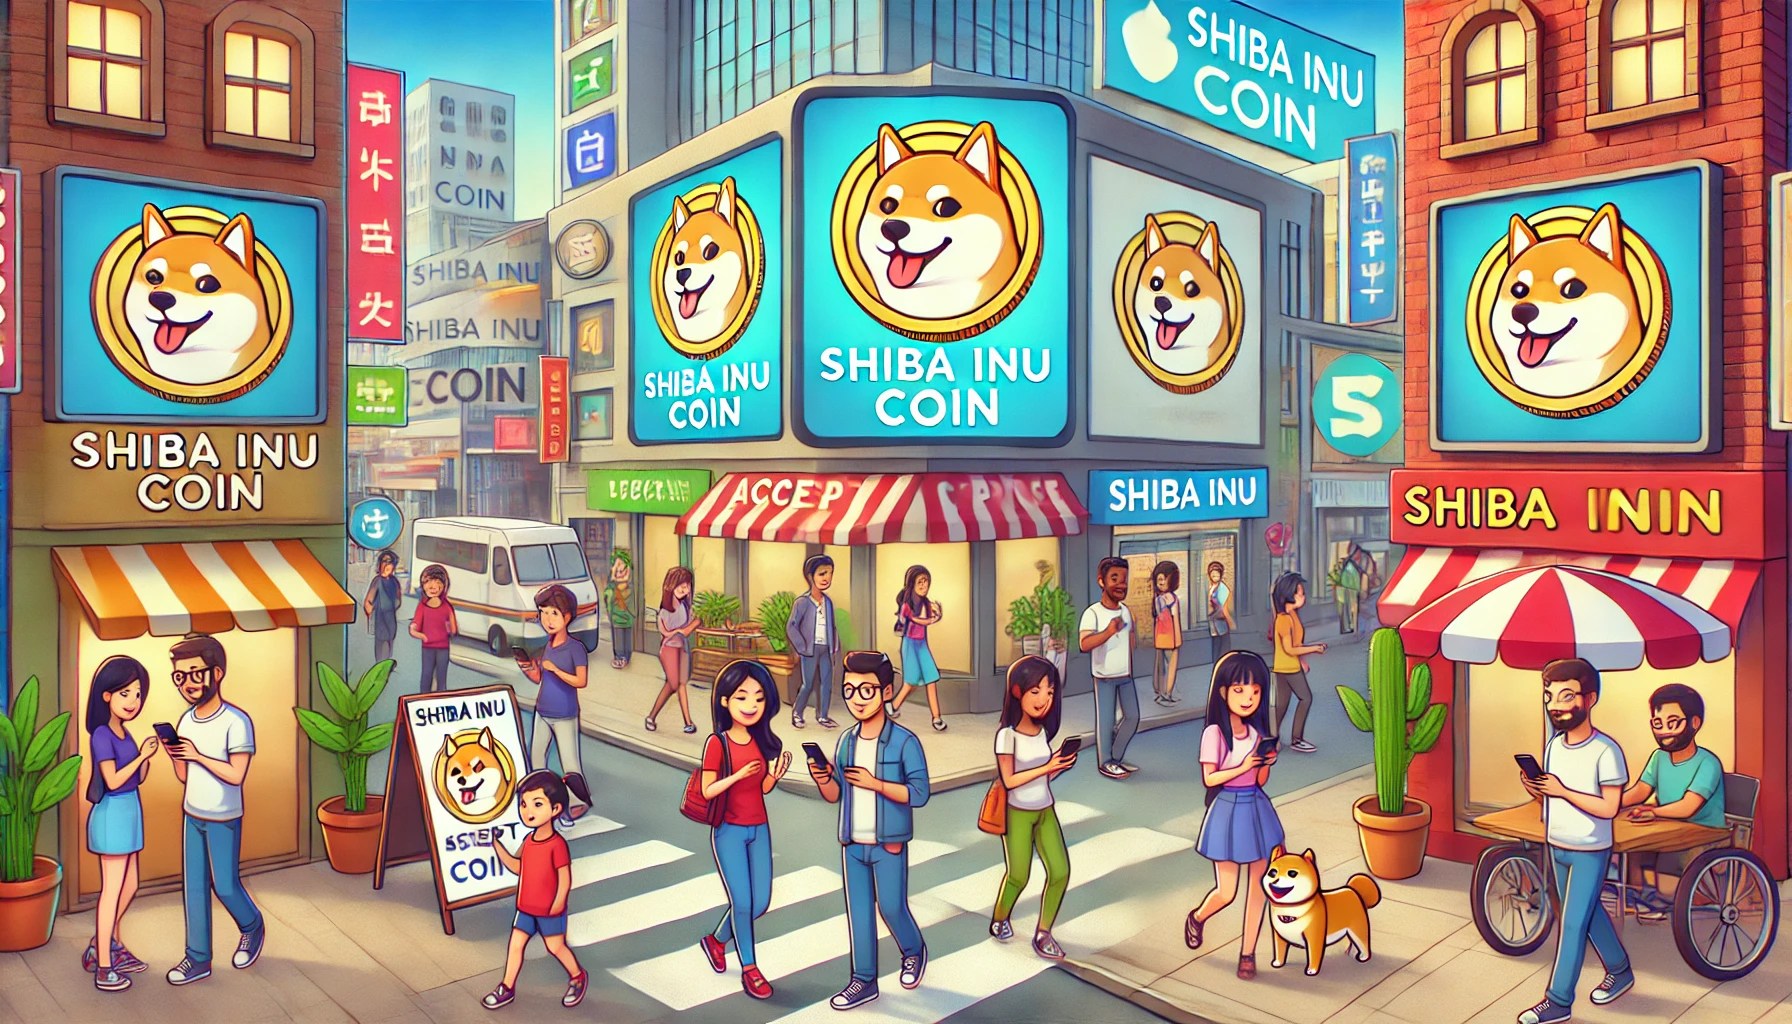 Shiba Inu Scores Another Major Adoption With Latest Crypto.Com Announcement